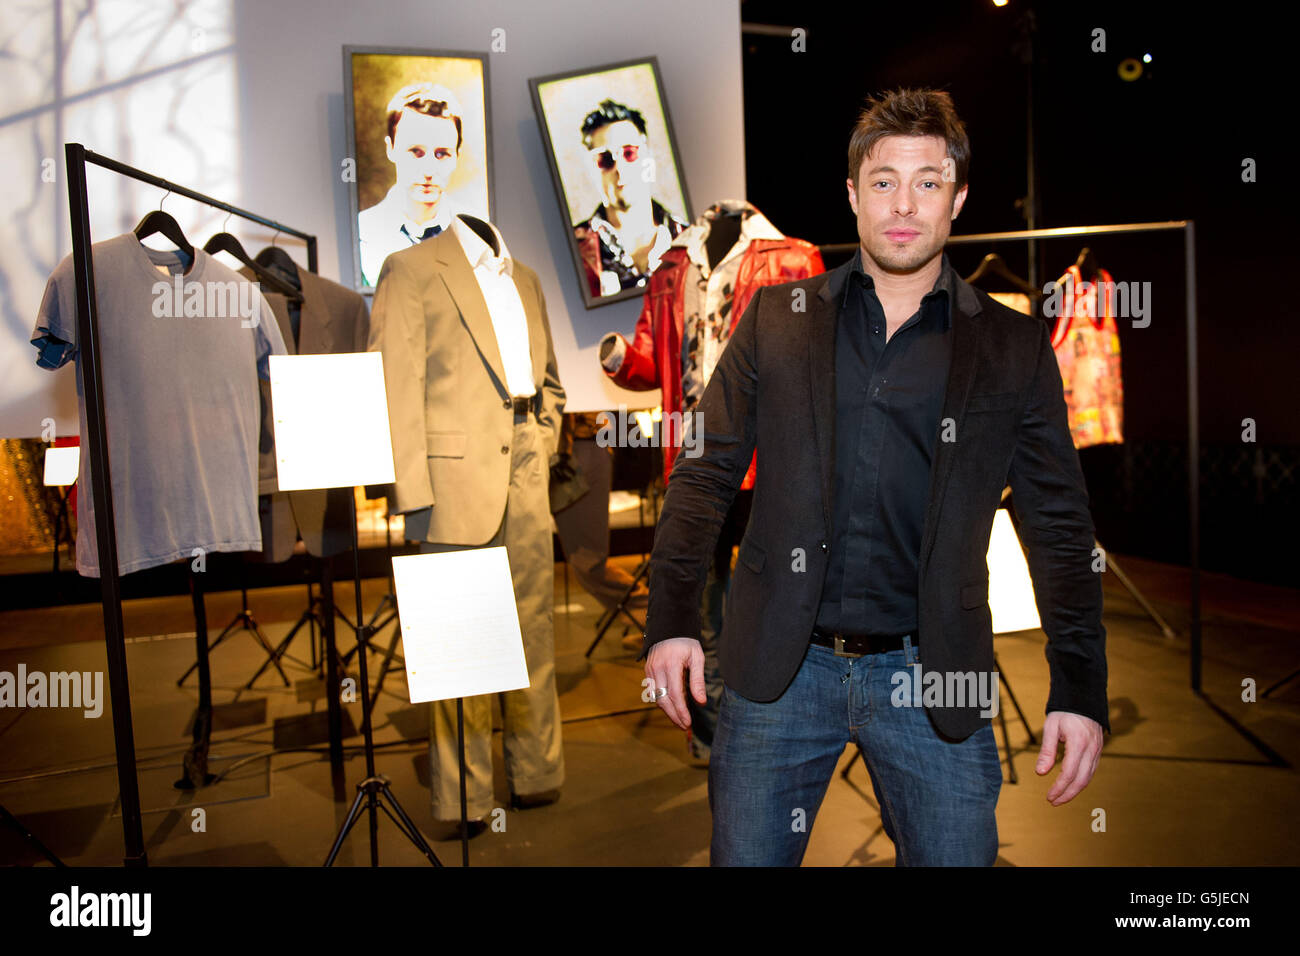 Duncan James nimmt an der Private View Gala der American Airline in der Hollywood Costume Exhibition im Victoria and Albert Museum, London Teil. Stockfoto